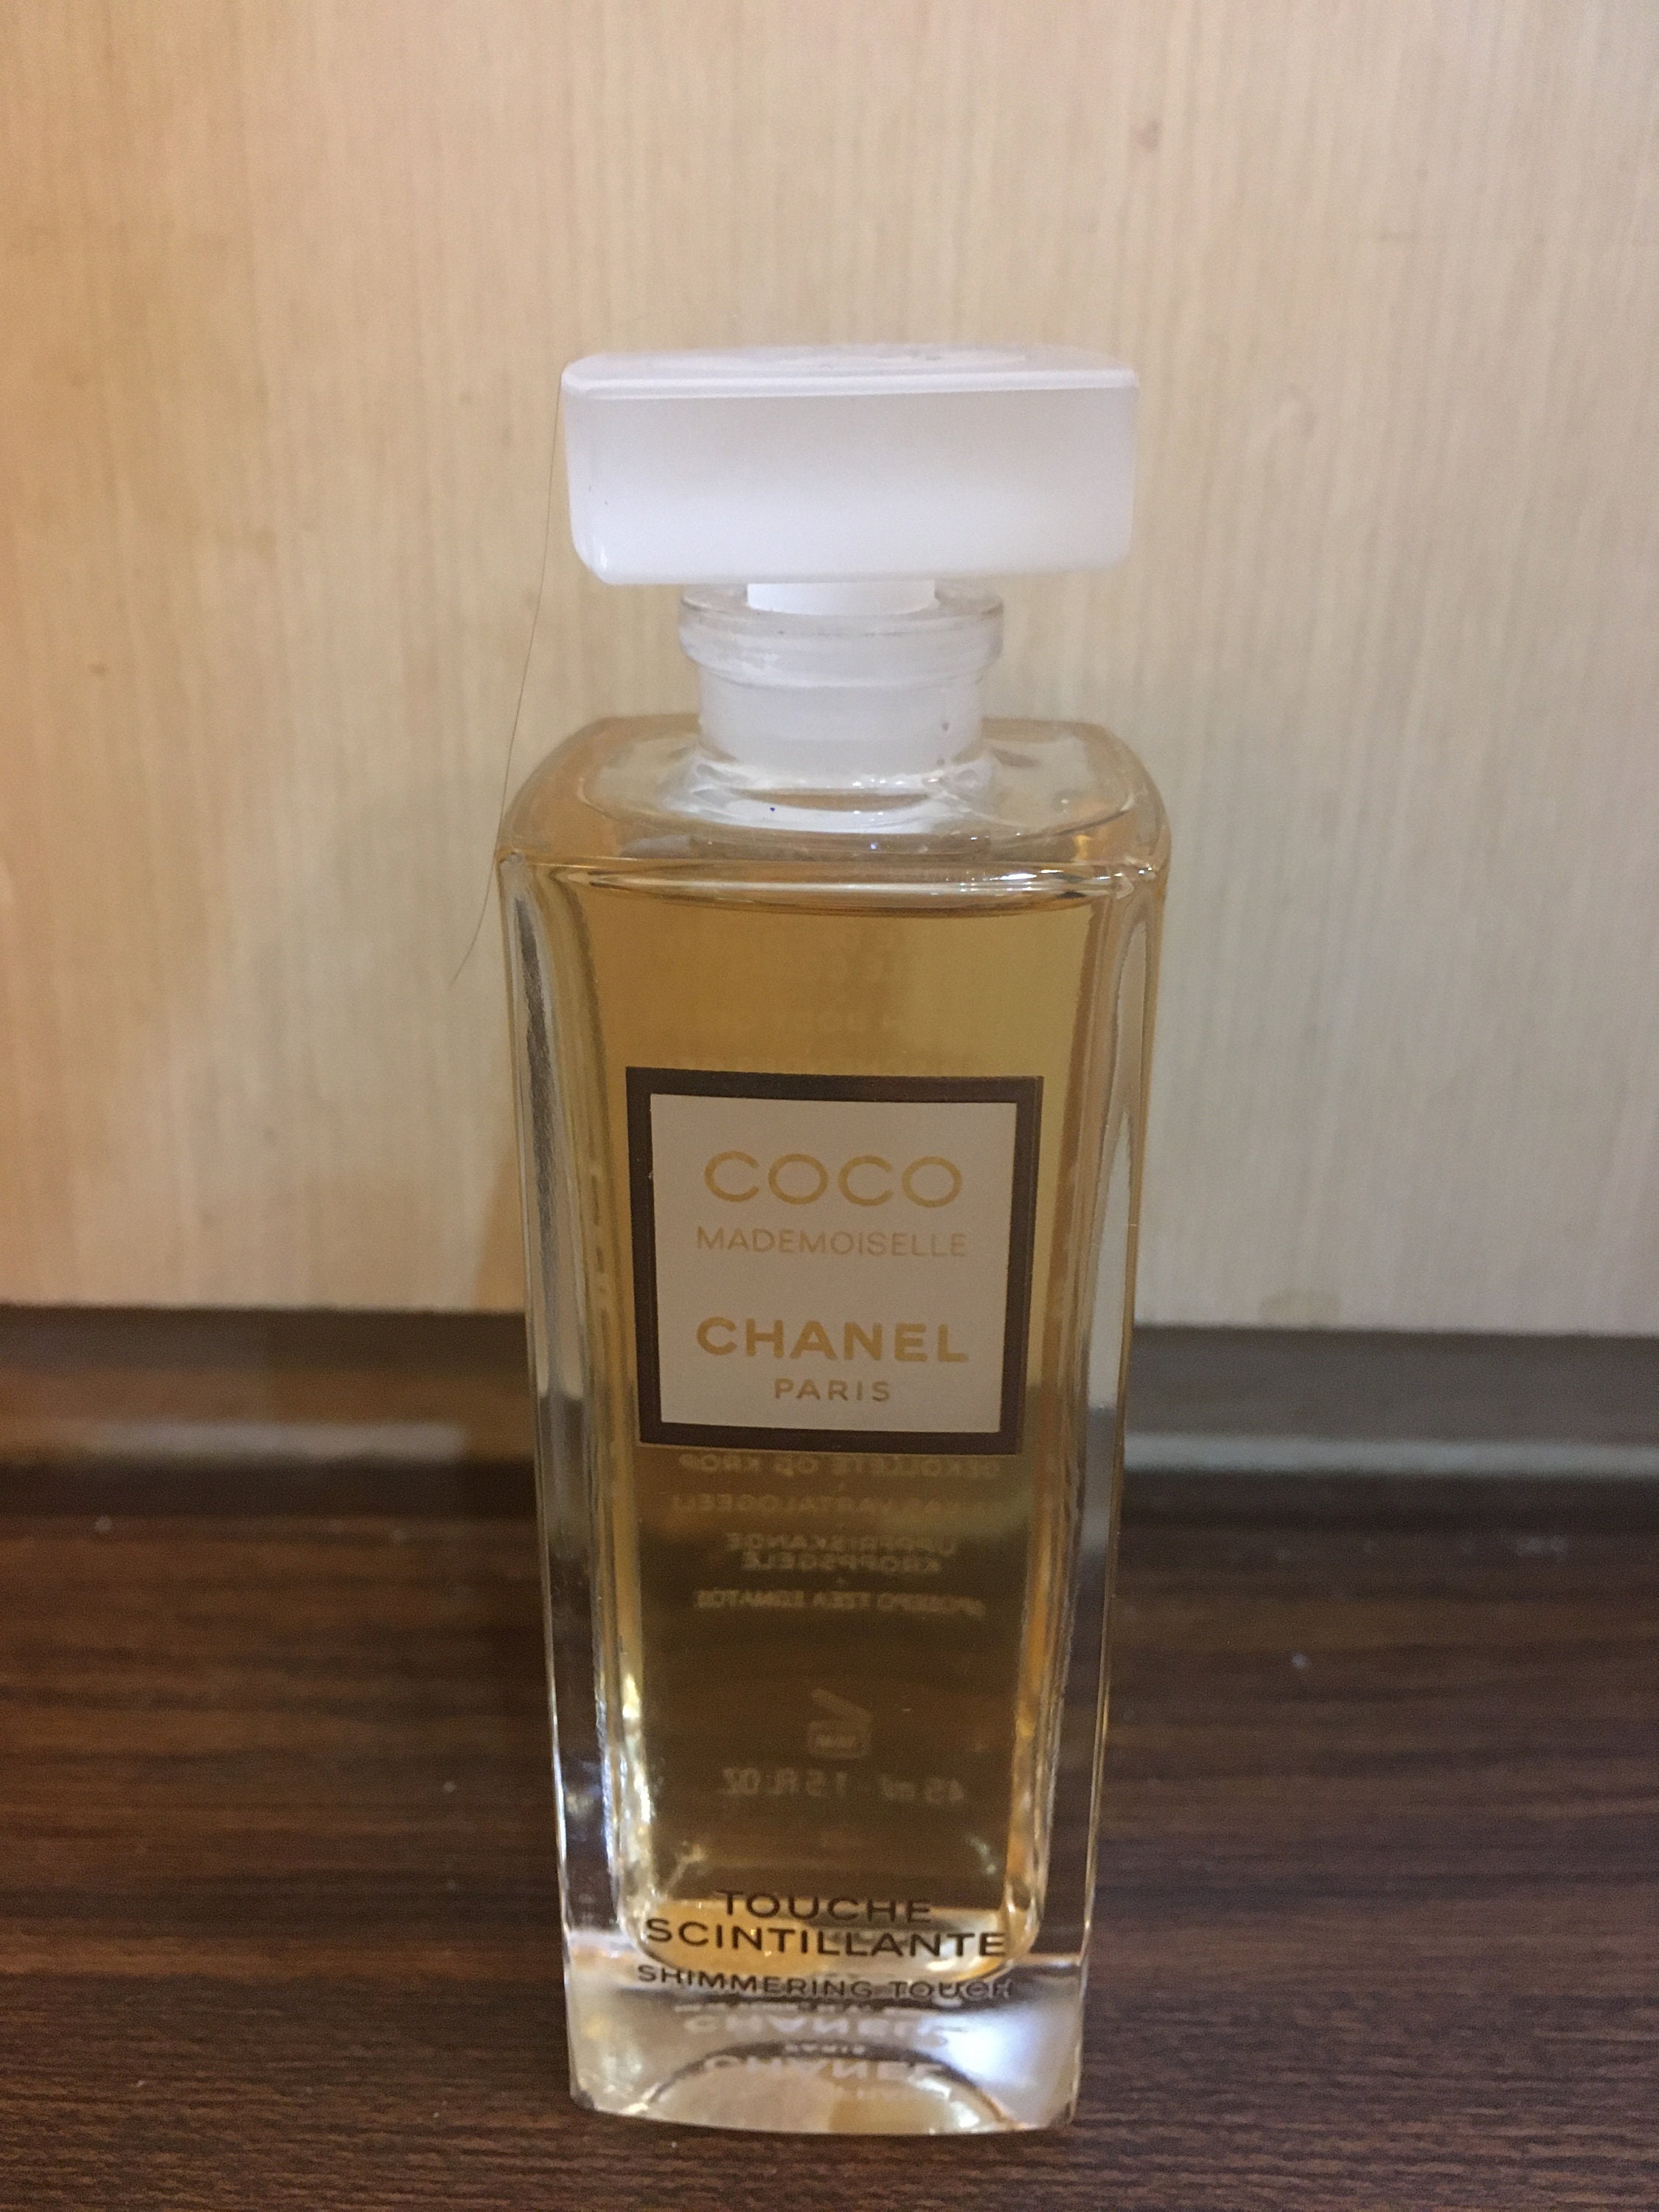 Rare Chanel mademoiselle shimmering touch gel